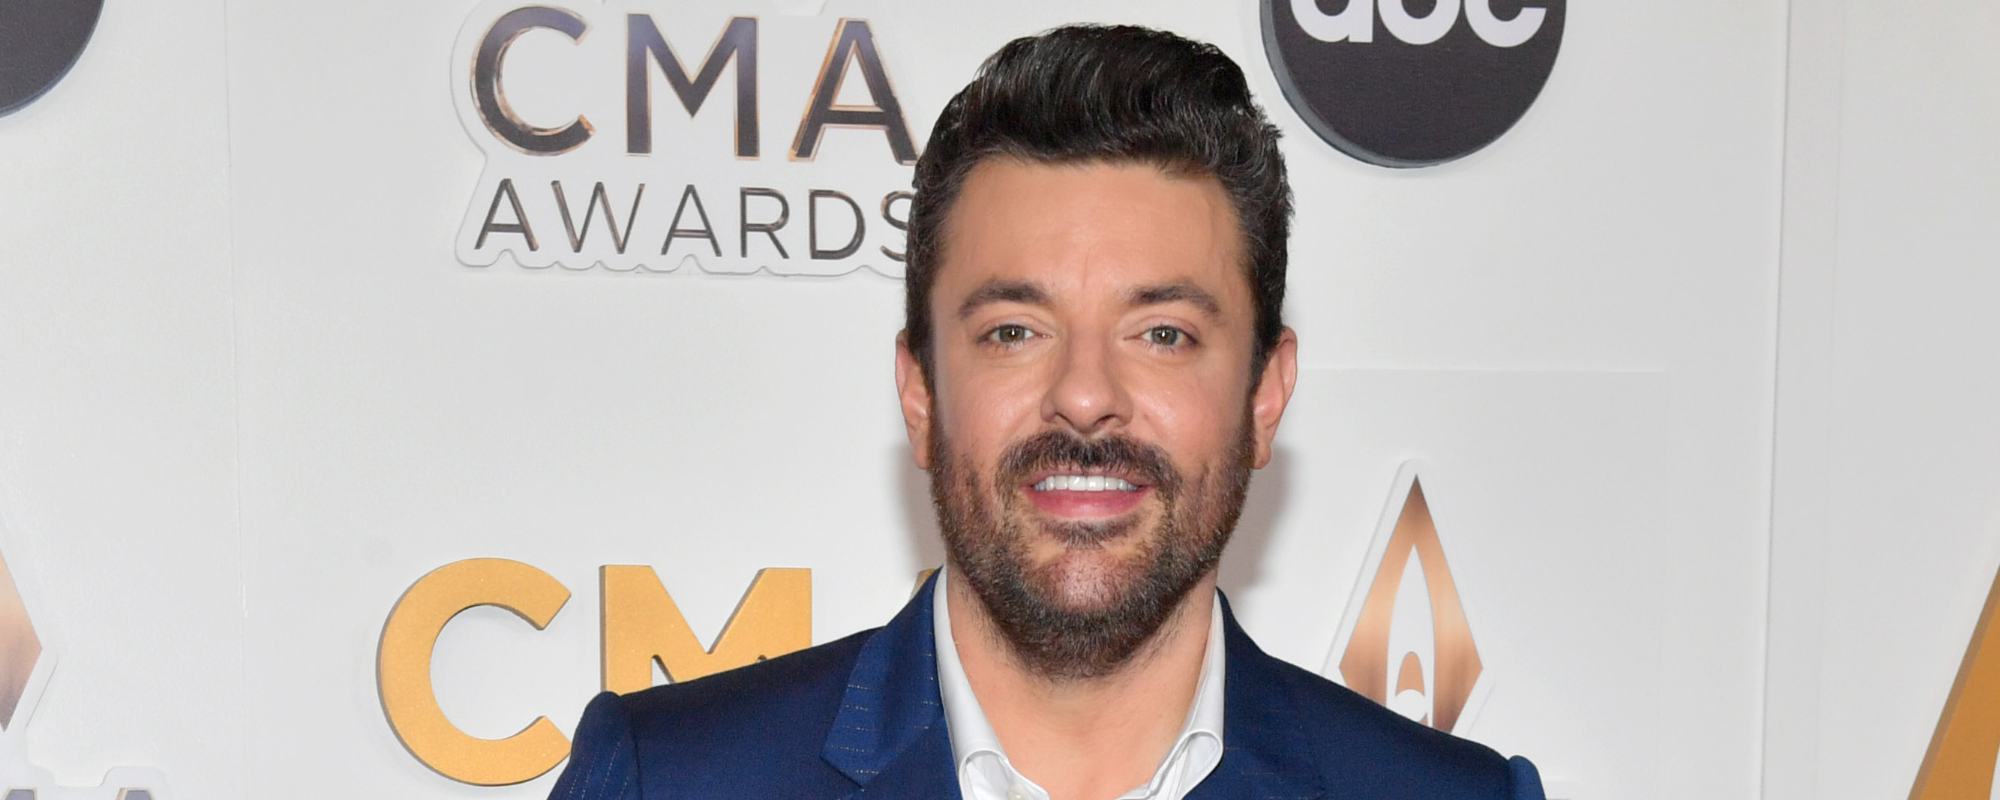 Chris Young Opens up About New Album and How “People Can Tell if You Are Fake”